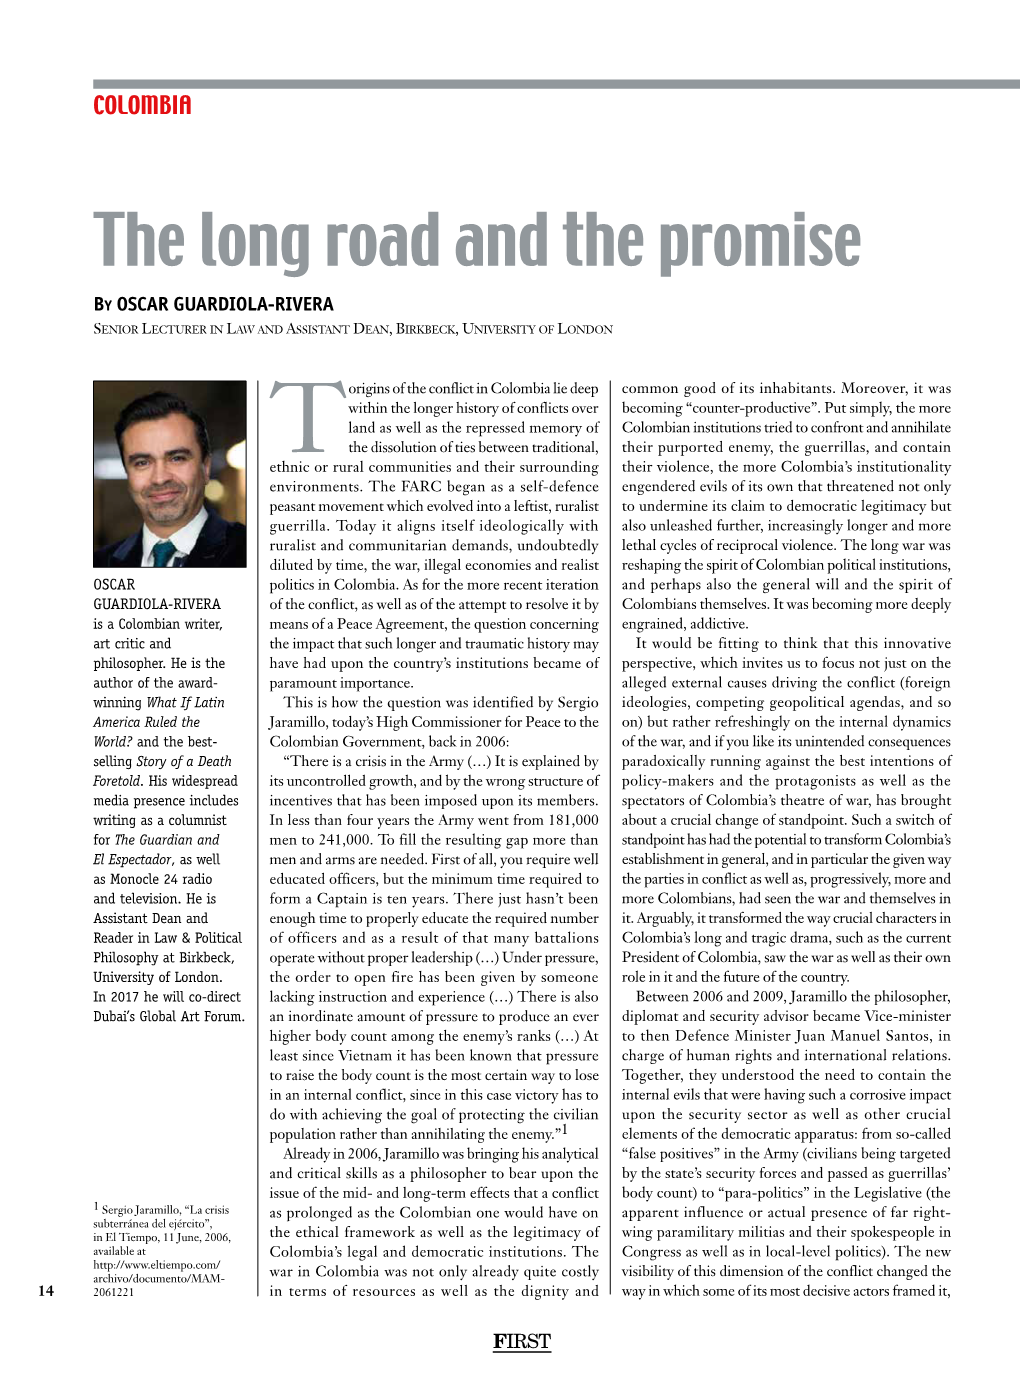 The Long Road and the Promise by OSCAR GUARDIOLA-RIVERA Senior Lecturer in Law and Assistant Dean, Birkbeck, University of London